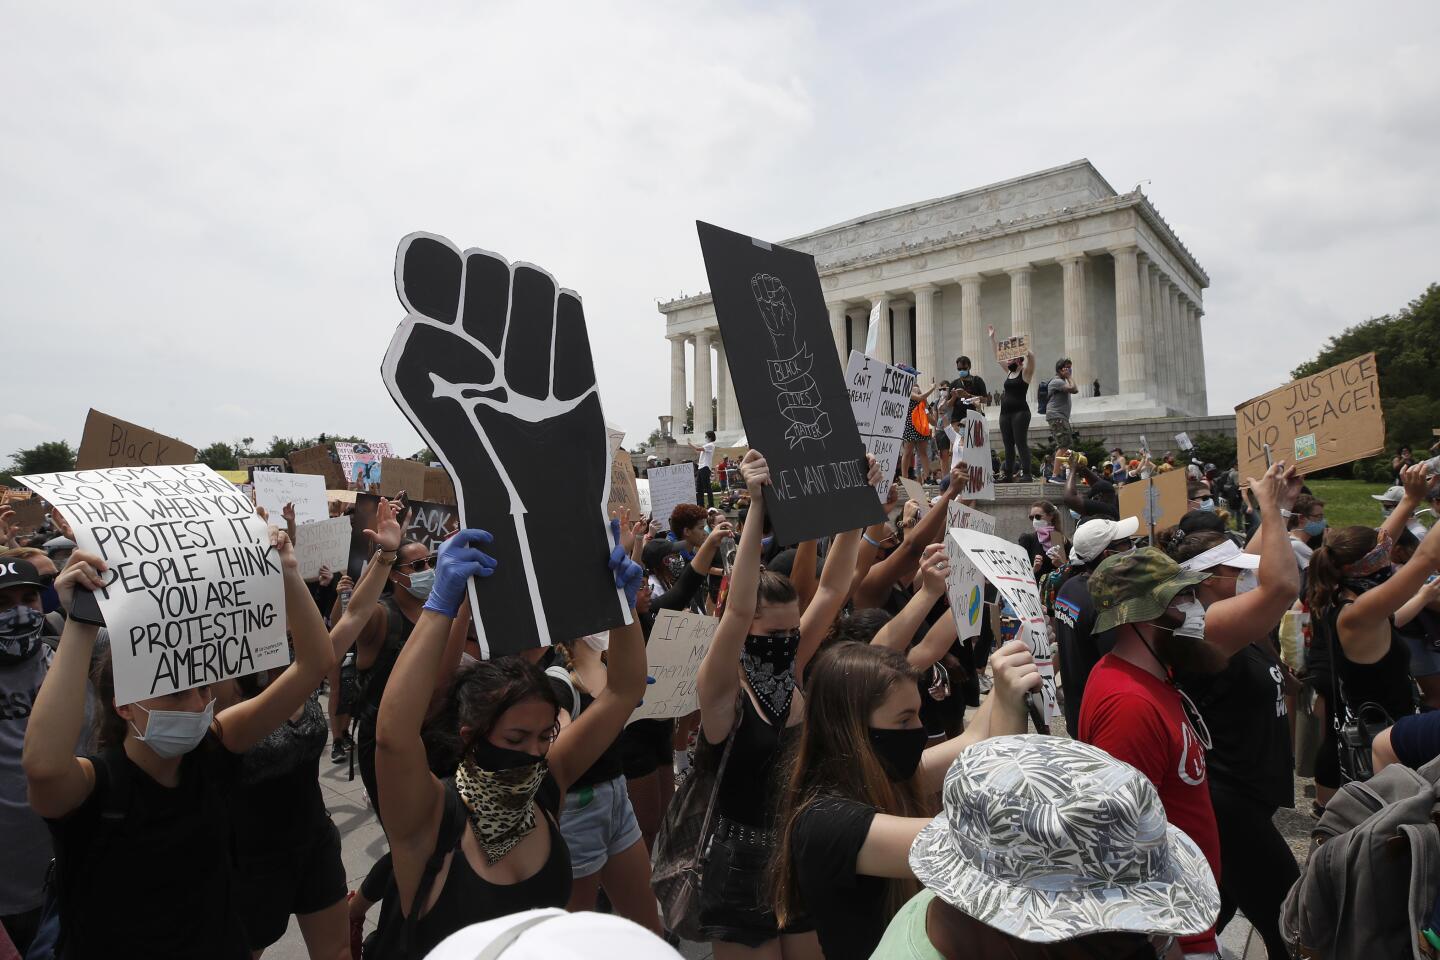 Protests in Washington, D.C. over the death of George Floyd